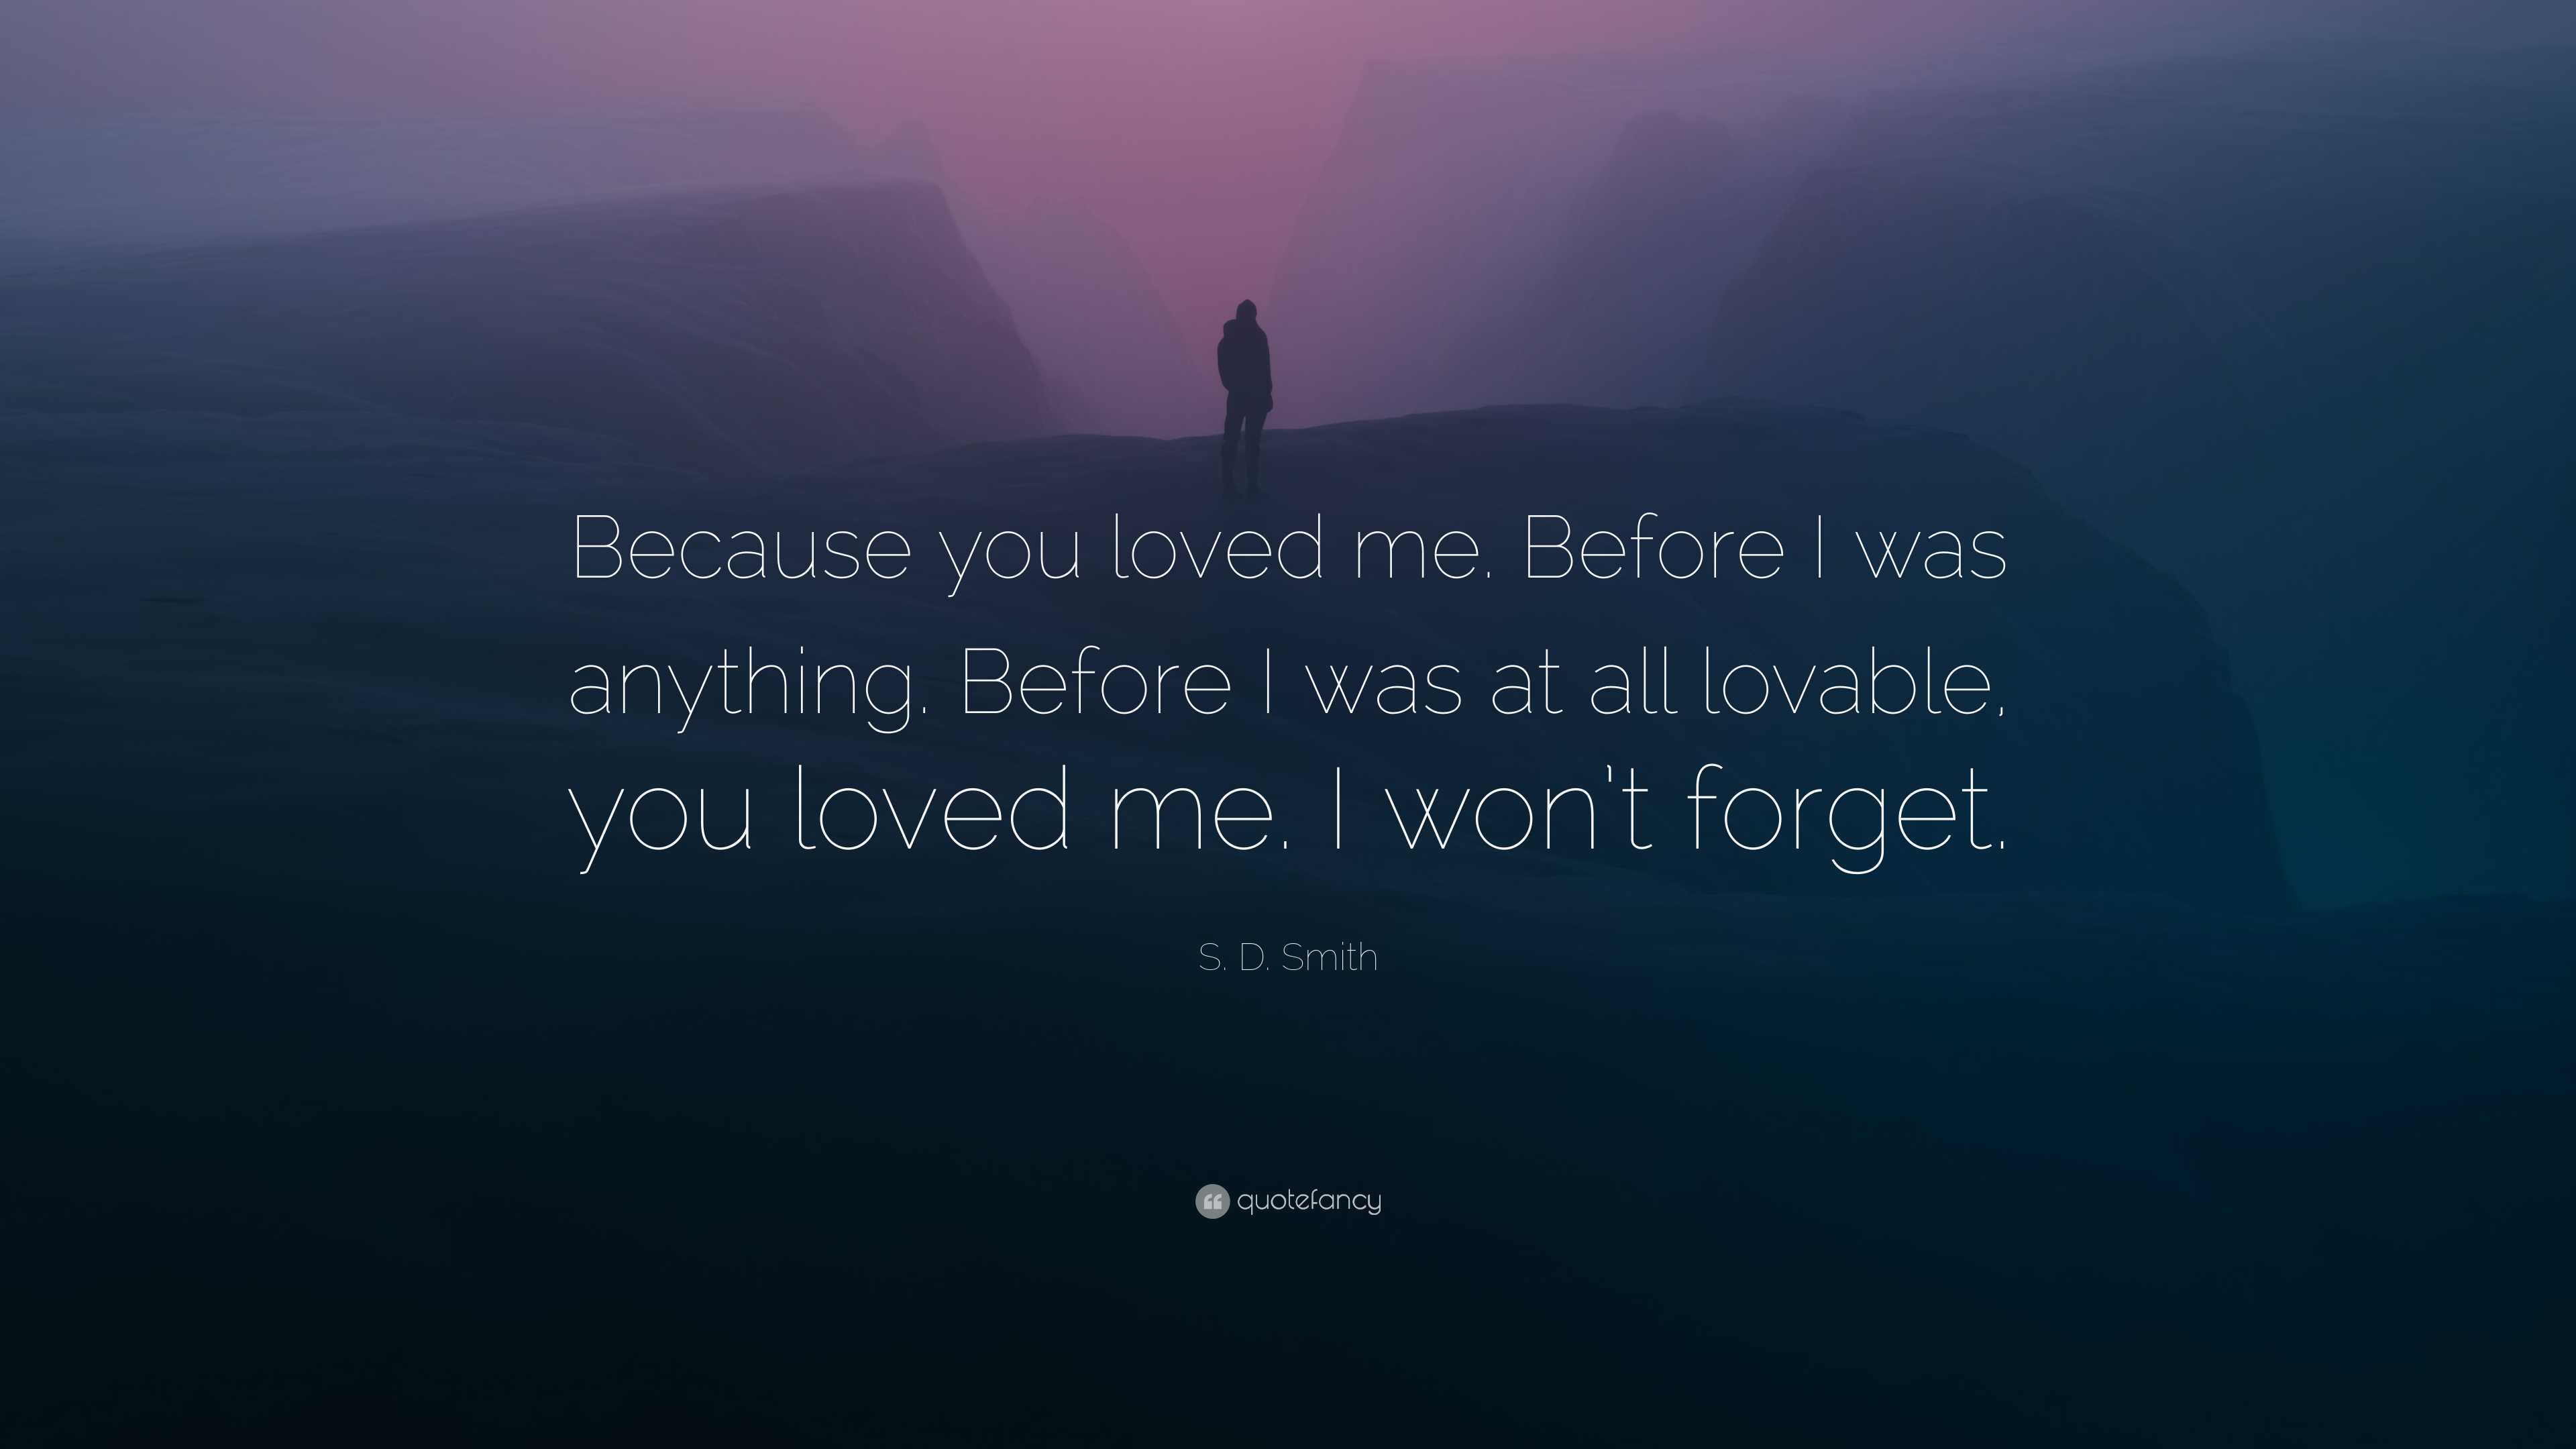 8039435 S D Smith Quote Because you loved me Before I was anything Before